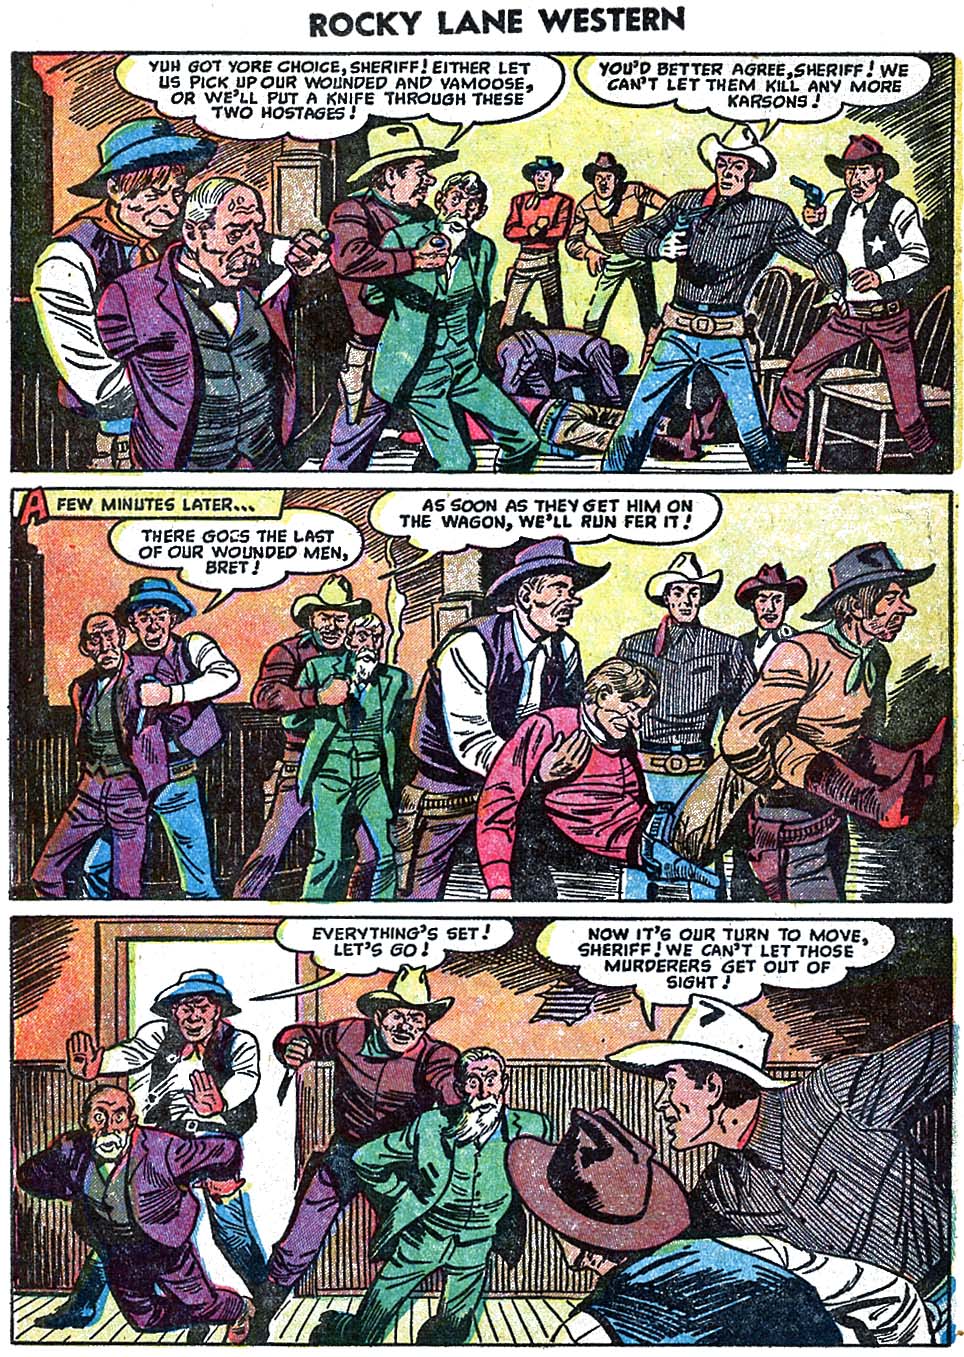 Rocky Lane Western (1954) issue 60 - Page 25